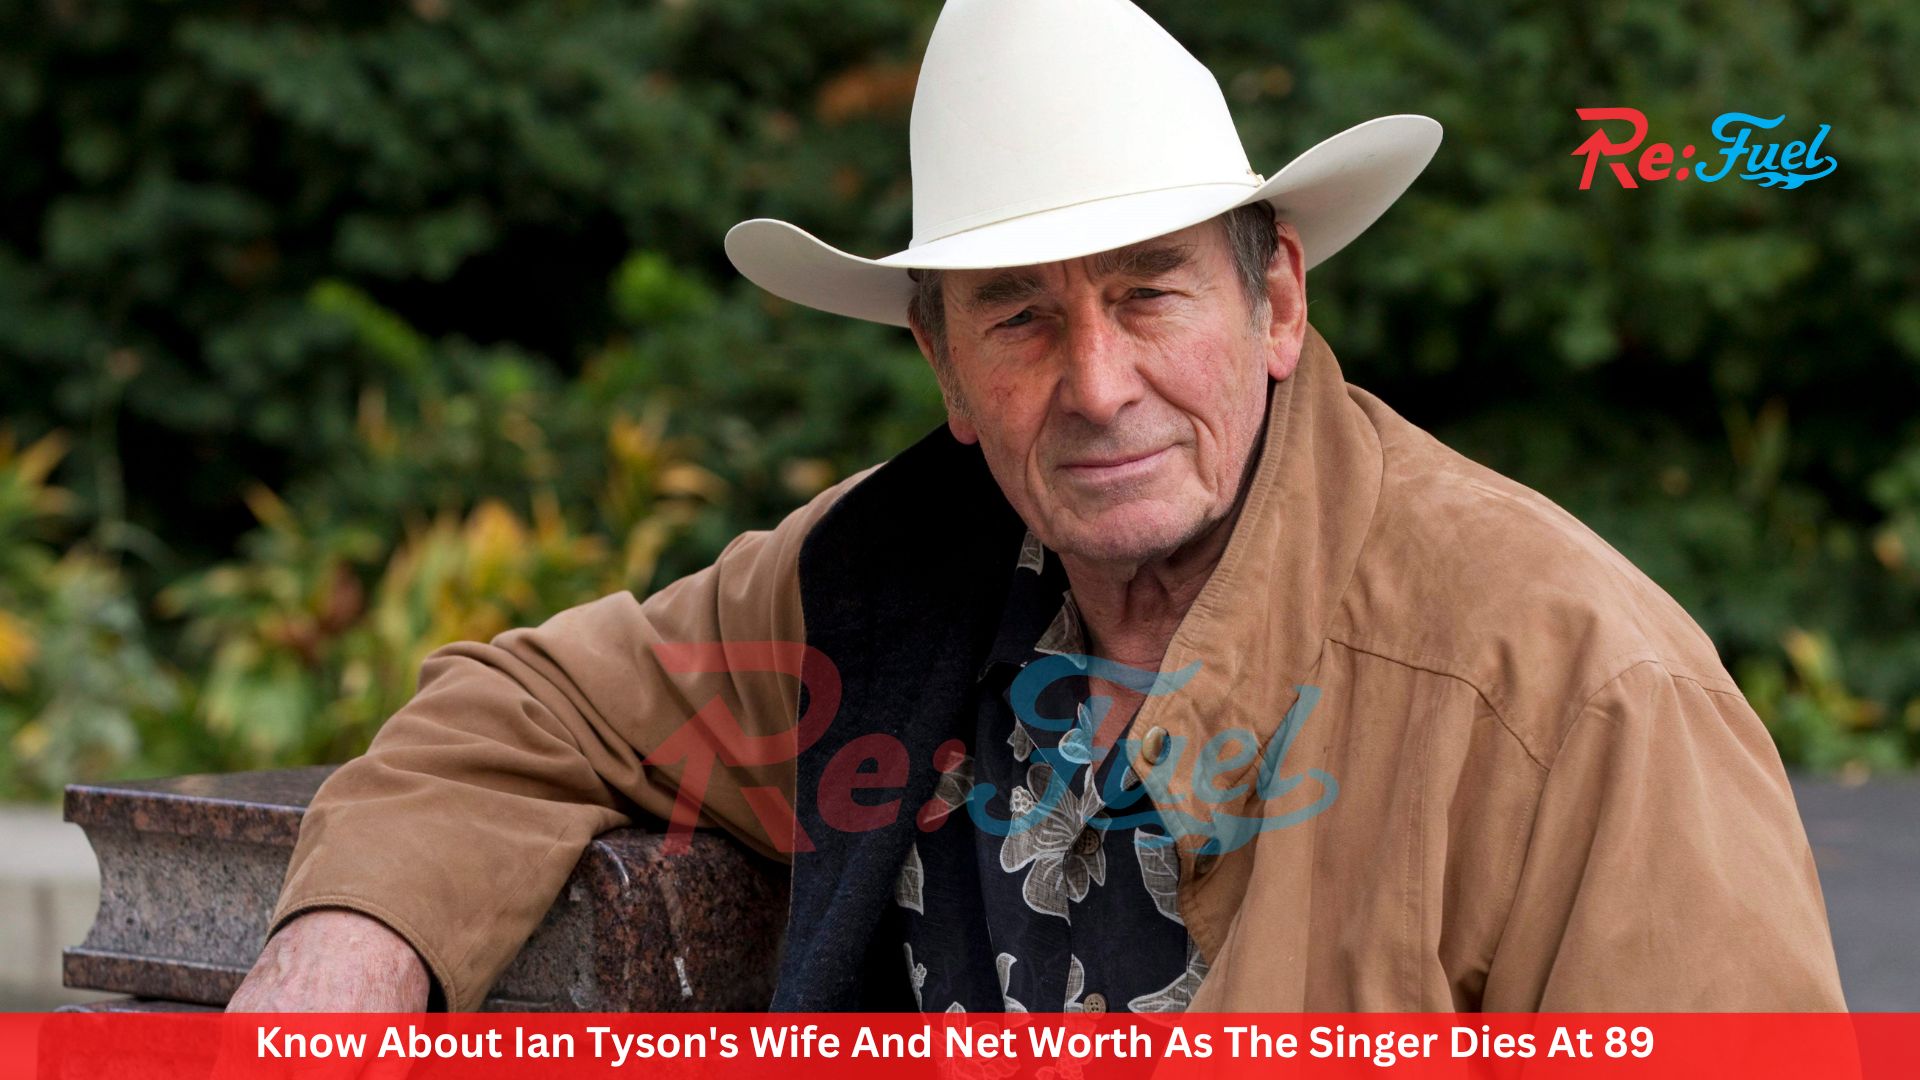 Know About Ian Tyson's Wife And Net Worth As The Singer Dies At 89